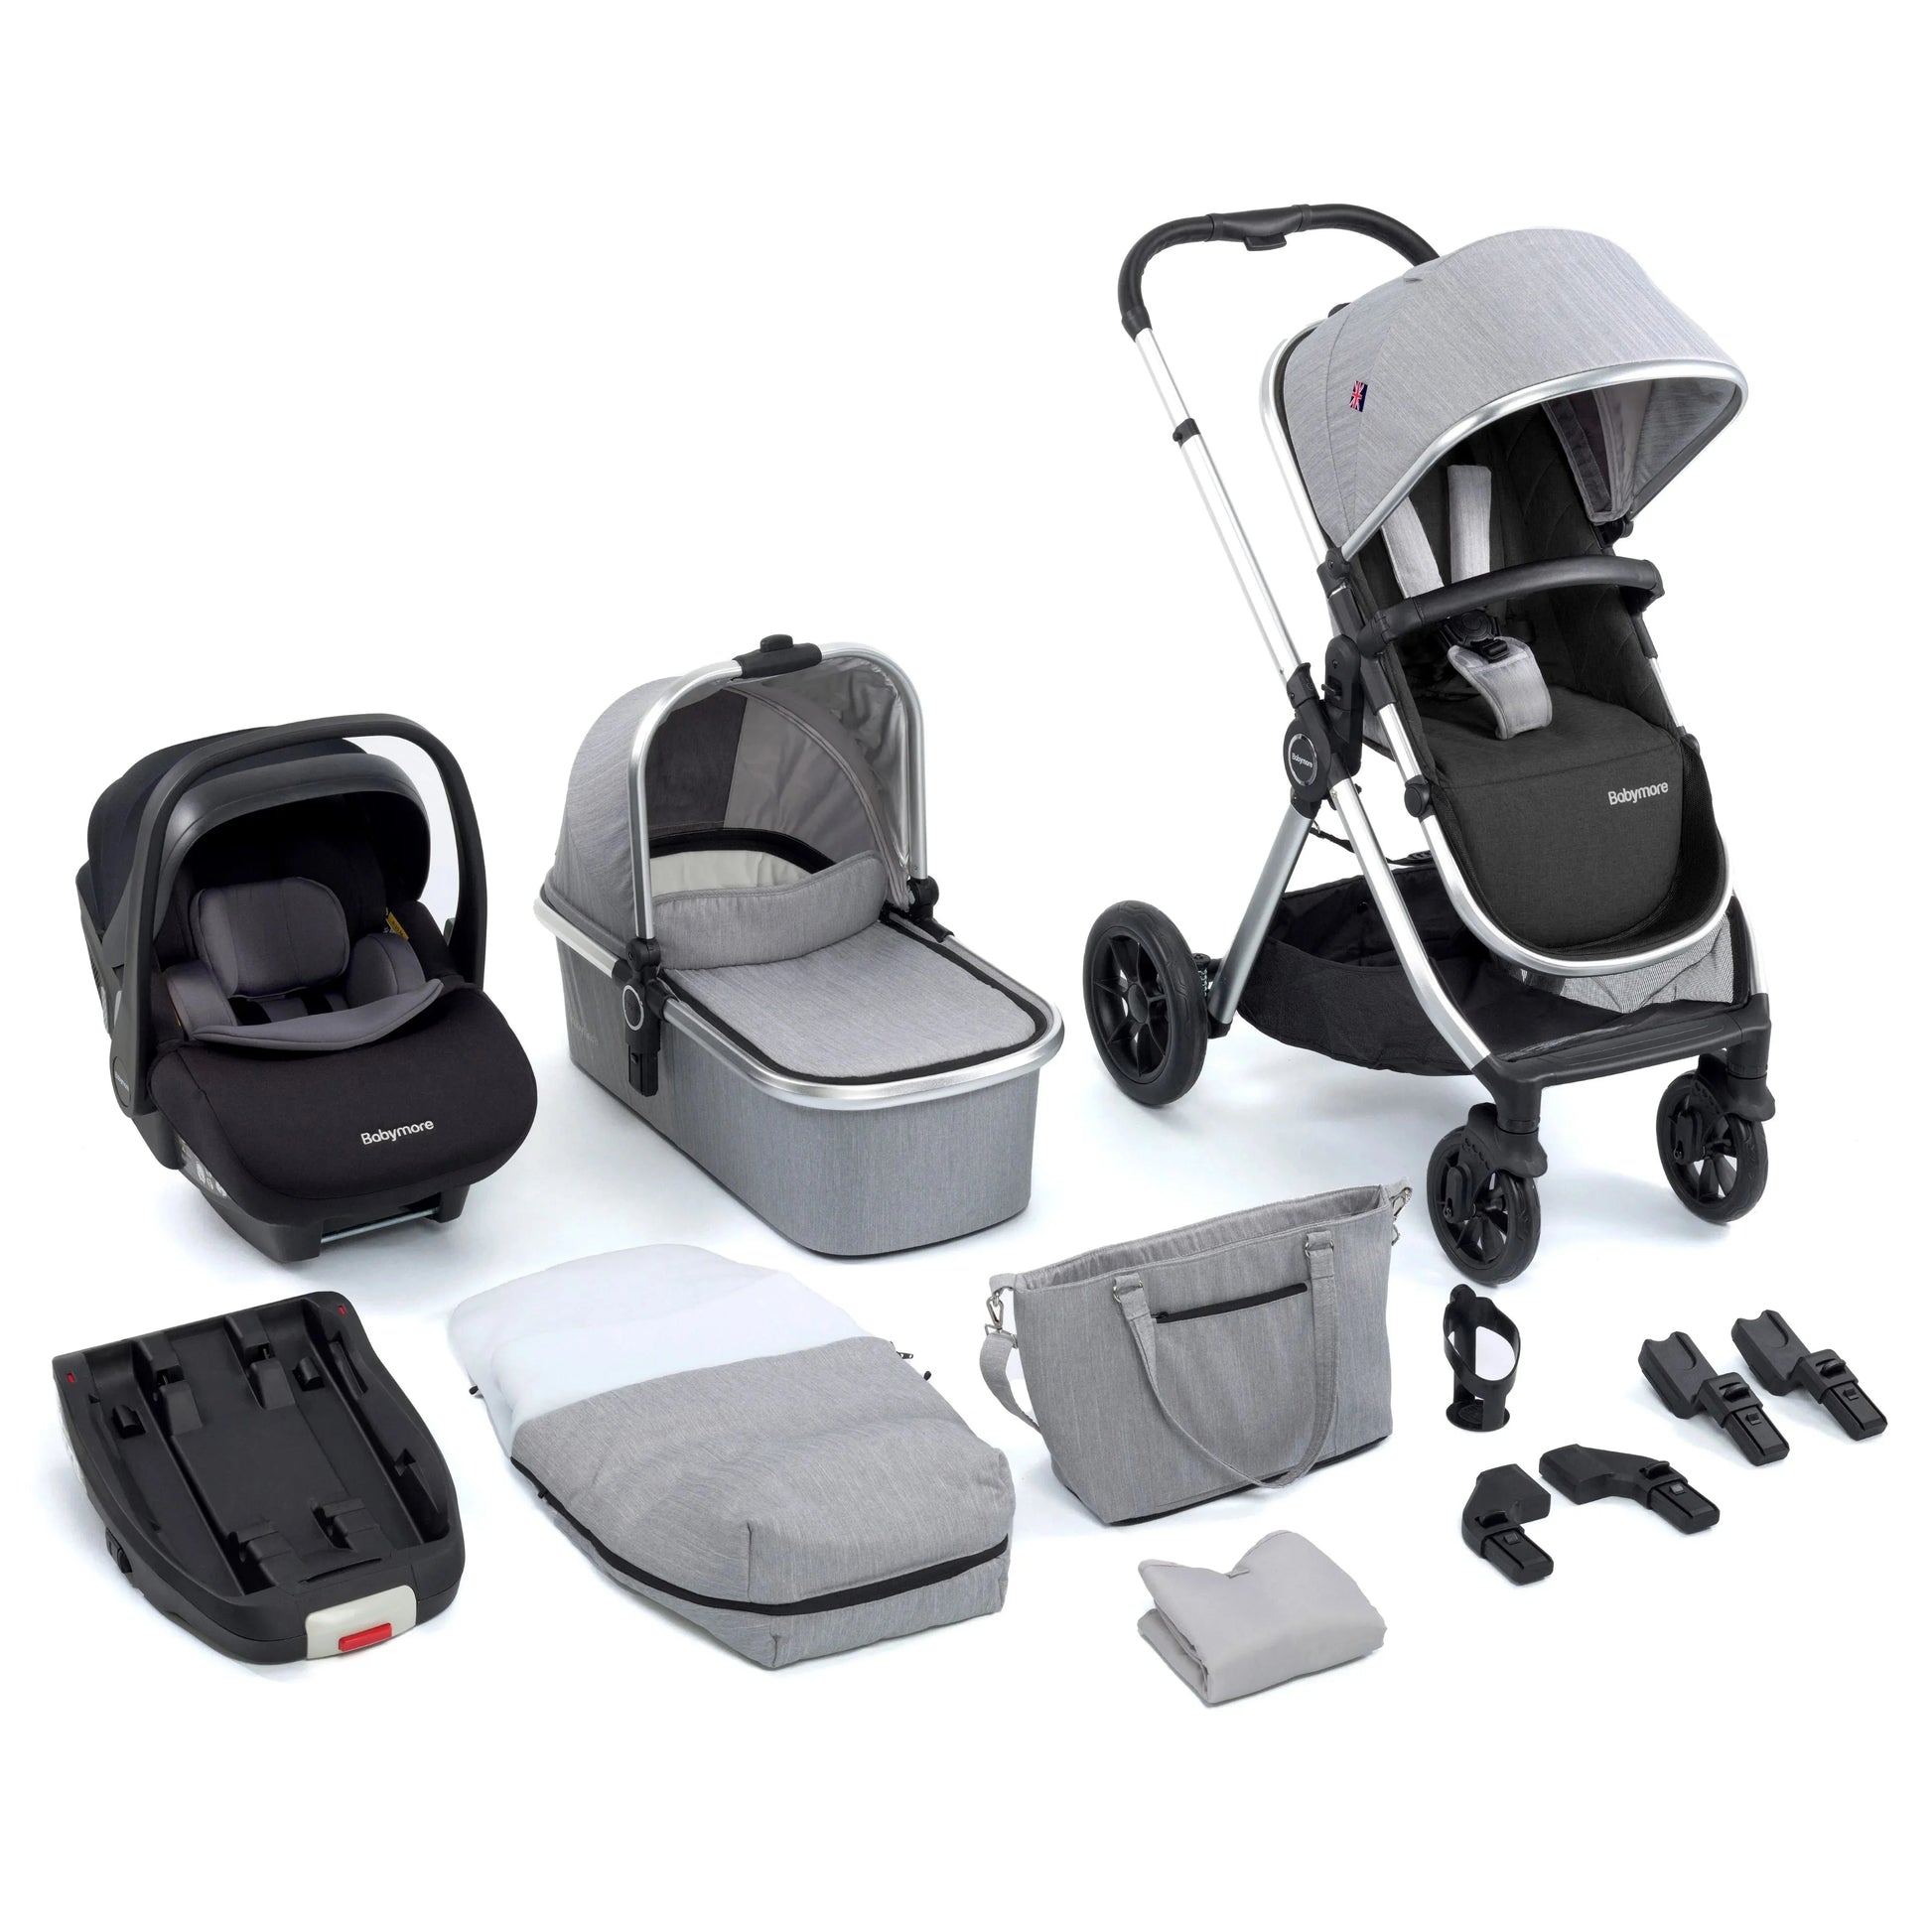 Babymore Memore V2 Travel System 13 Piece with Pecan i-Size Car Seat and Isofix Base - Silver BabyJoy